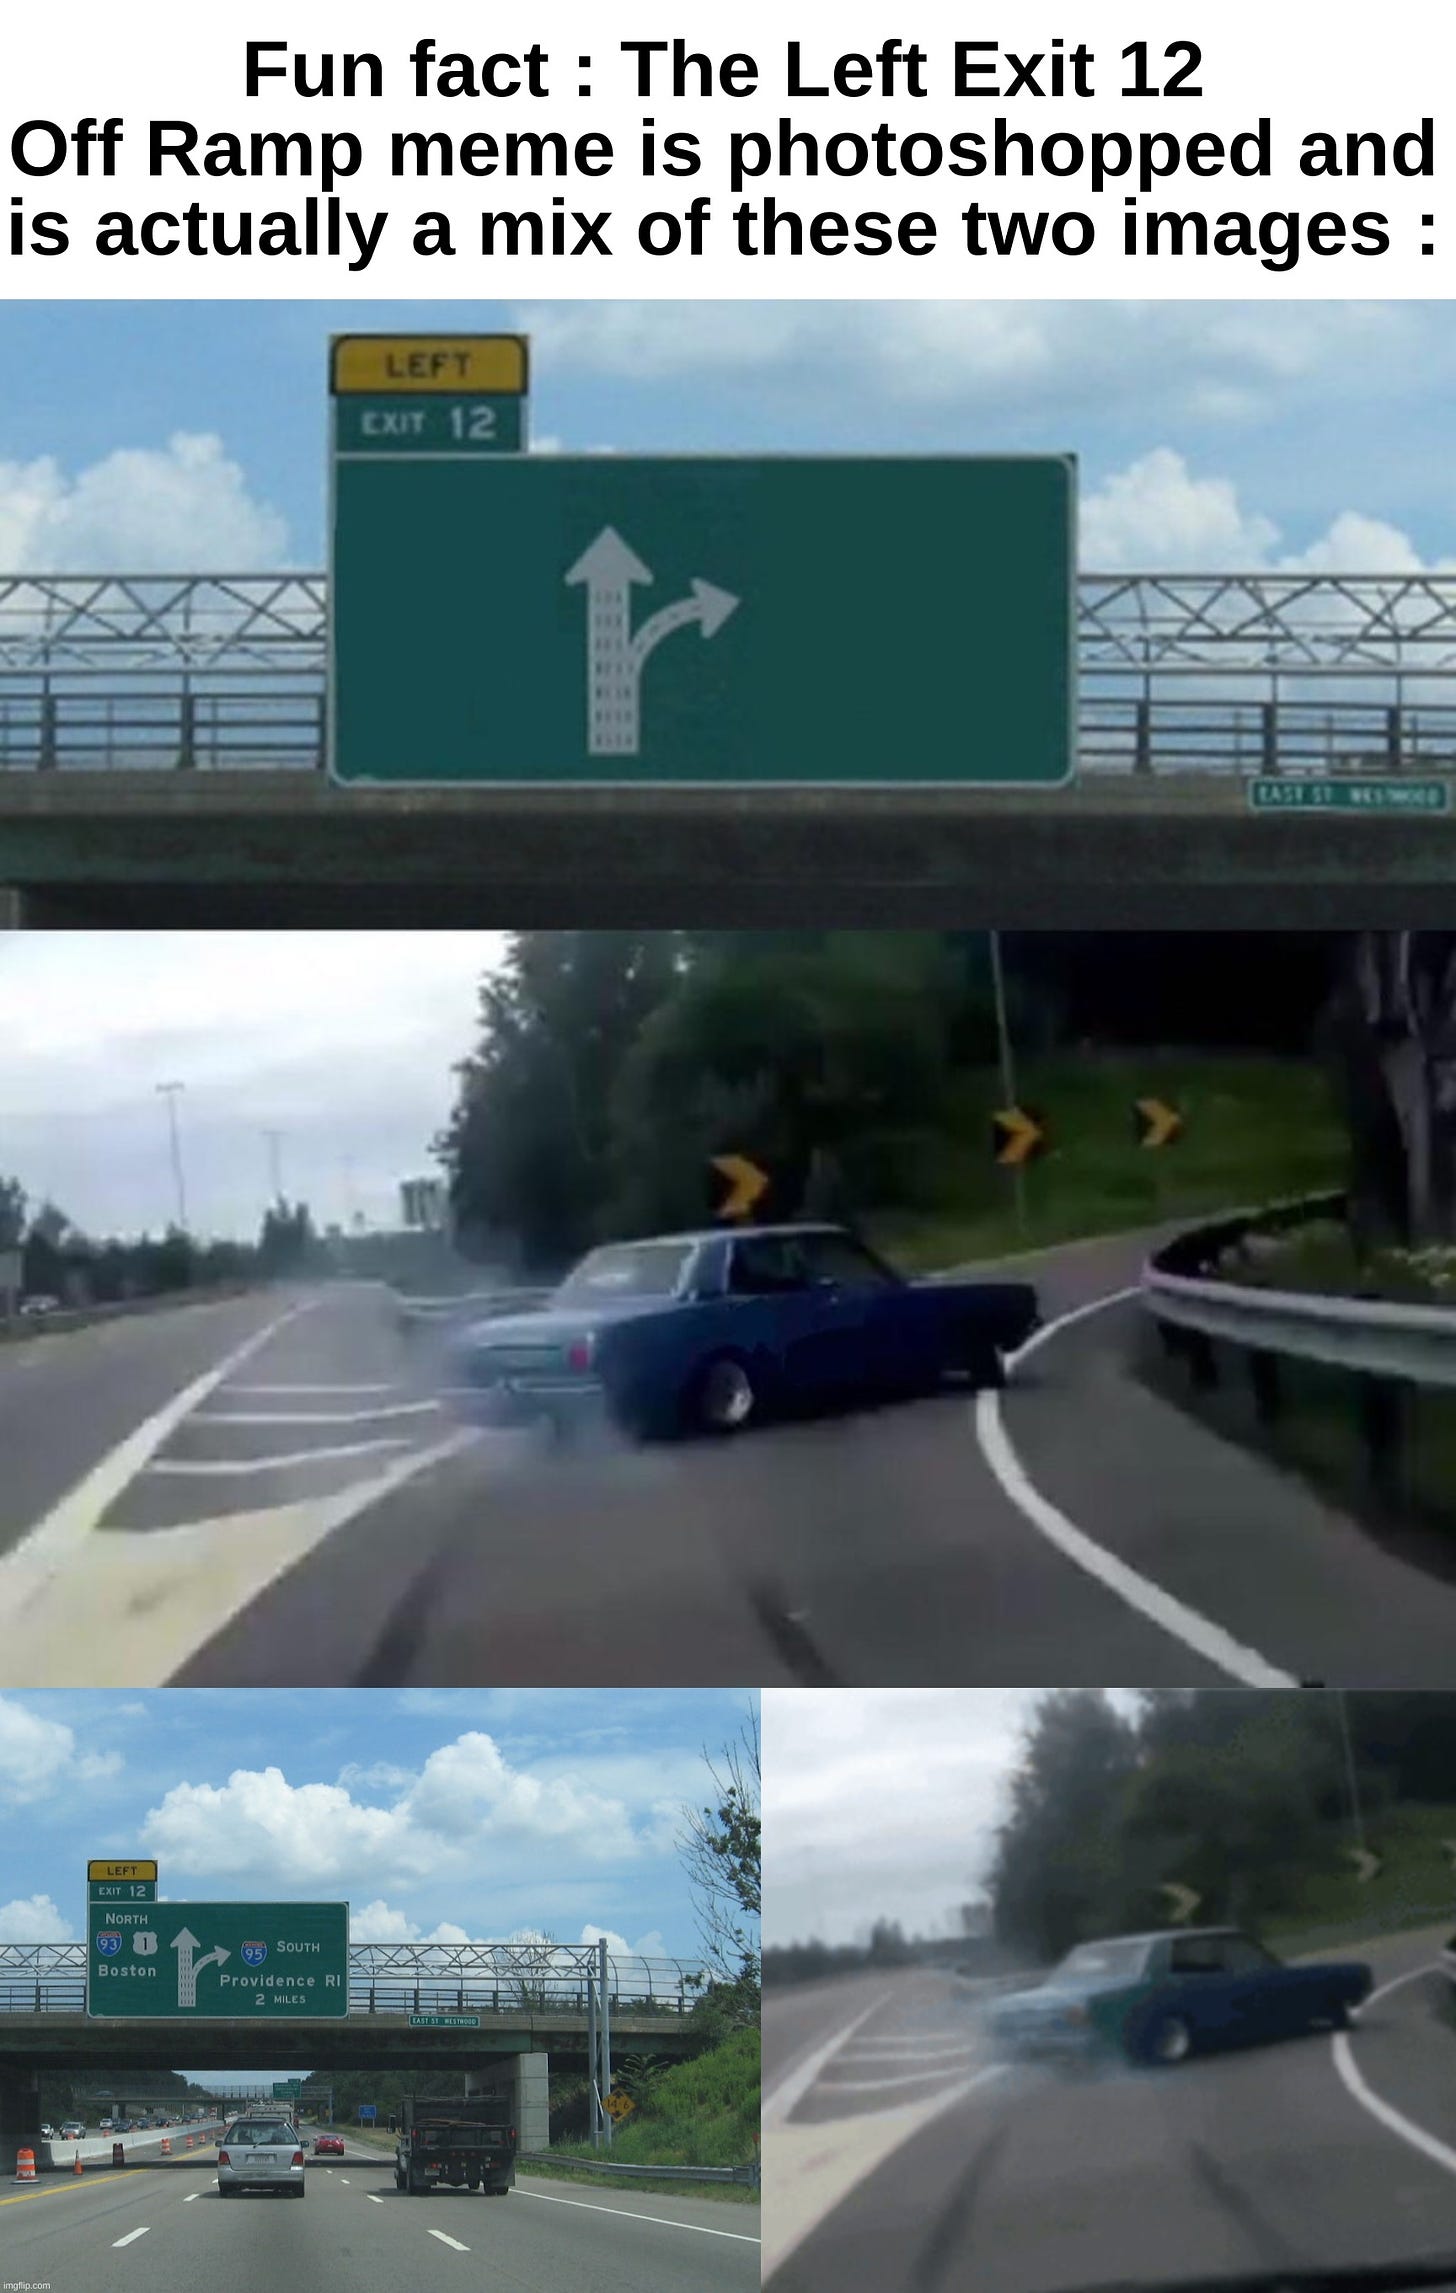 My whole life's been a lie | Fun fact : The Left Exit 12 Off Ramp meme is photoshopped and is actually a mix of these two images : | image tagged in memes,left exit 12 off ramp,fun fact,photoshopped,front page plz | made w/ Imgflip meme maker